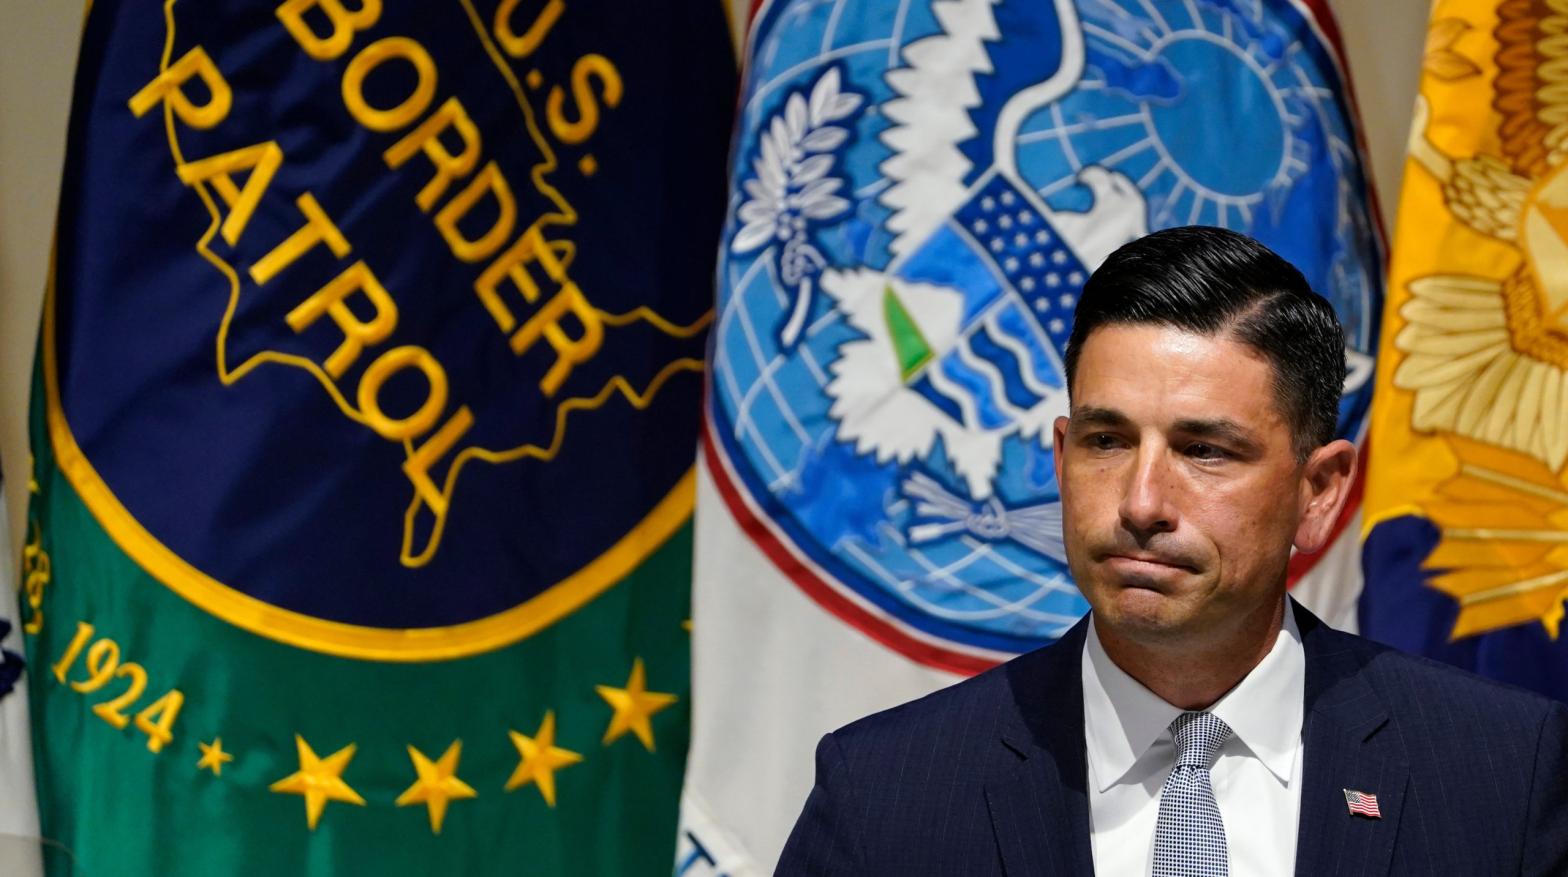 Chad Wolf, the illegally appointed head of DHS, an agency that has allegedly overseen unnecessary hysterectomies on immigrant women, according to a new whistleblower's complaint (Photo: Susan Walsh, AP)